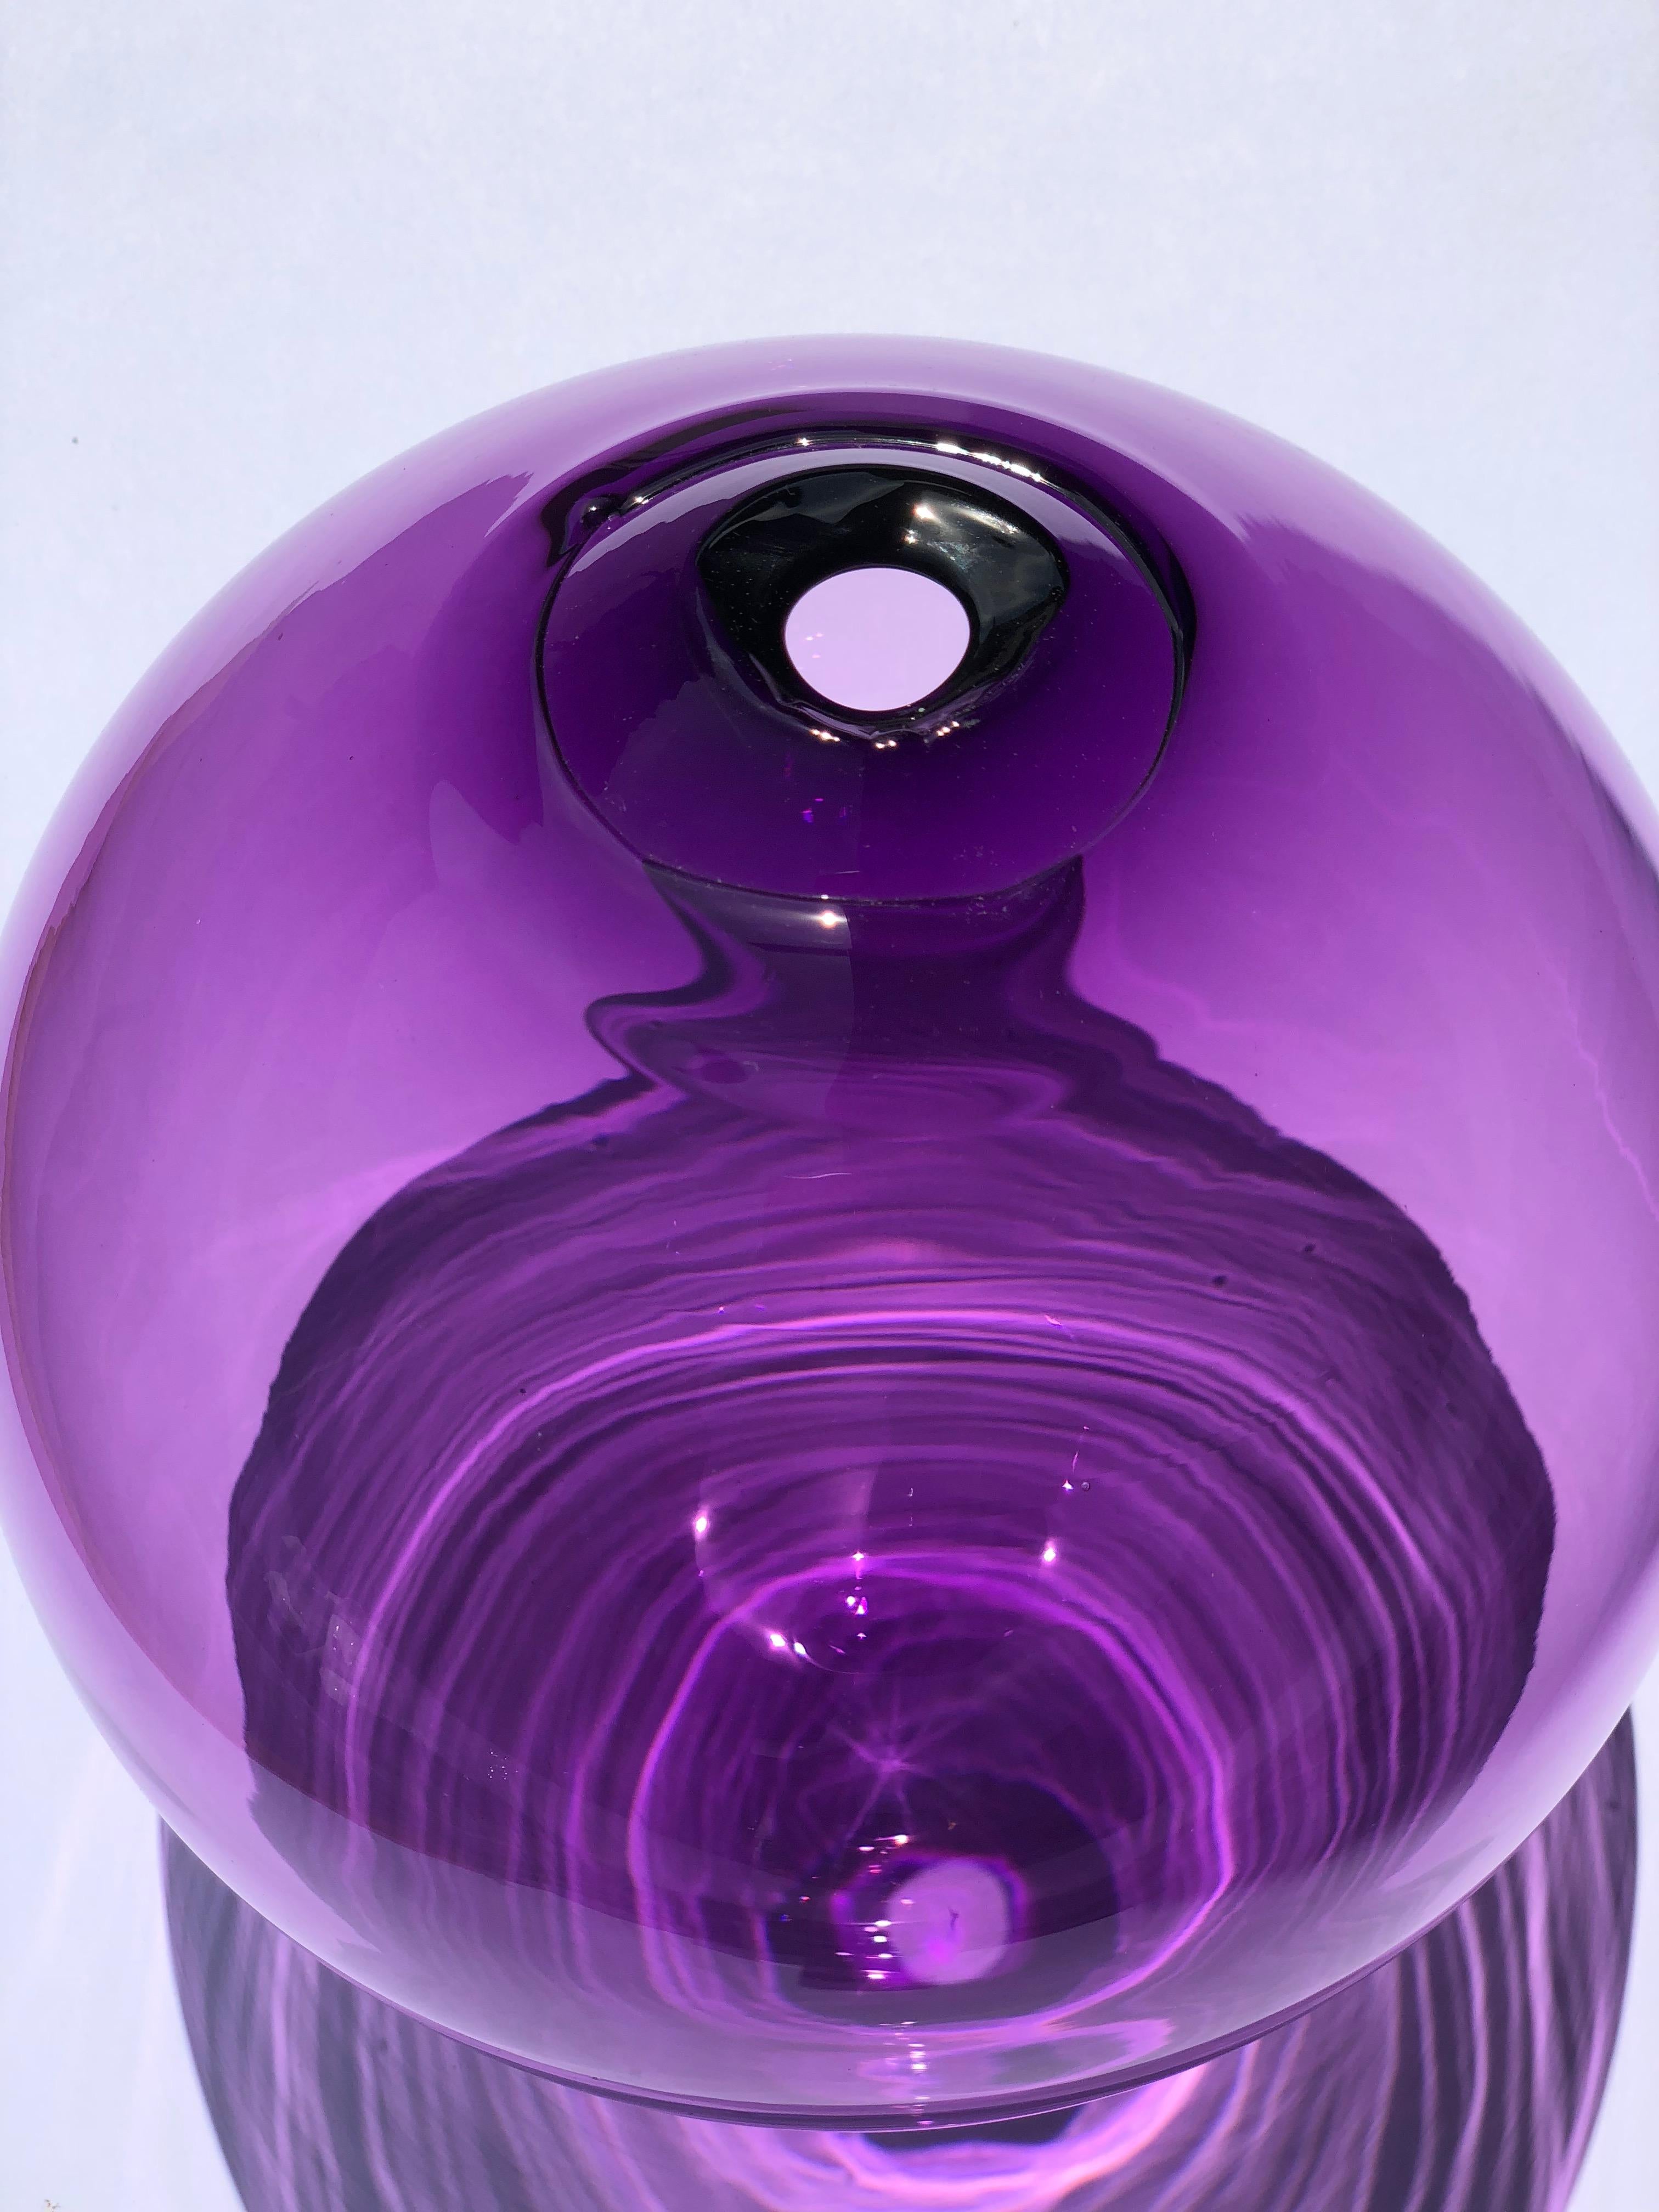 Contemporary studio glass made in the Czech Republic. This hand blown piece is composed of an organic, round form with a transparent violet color. The imperfections (varying density of glass, bubbles) are heightened by placing the object in sun